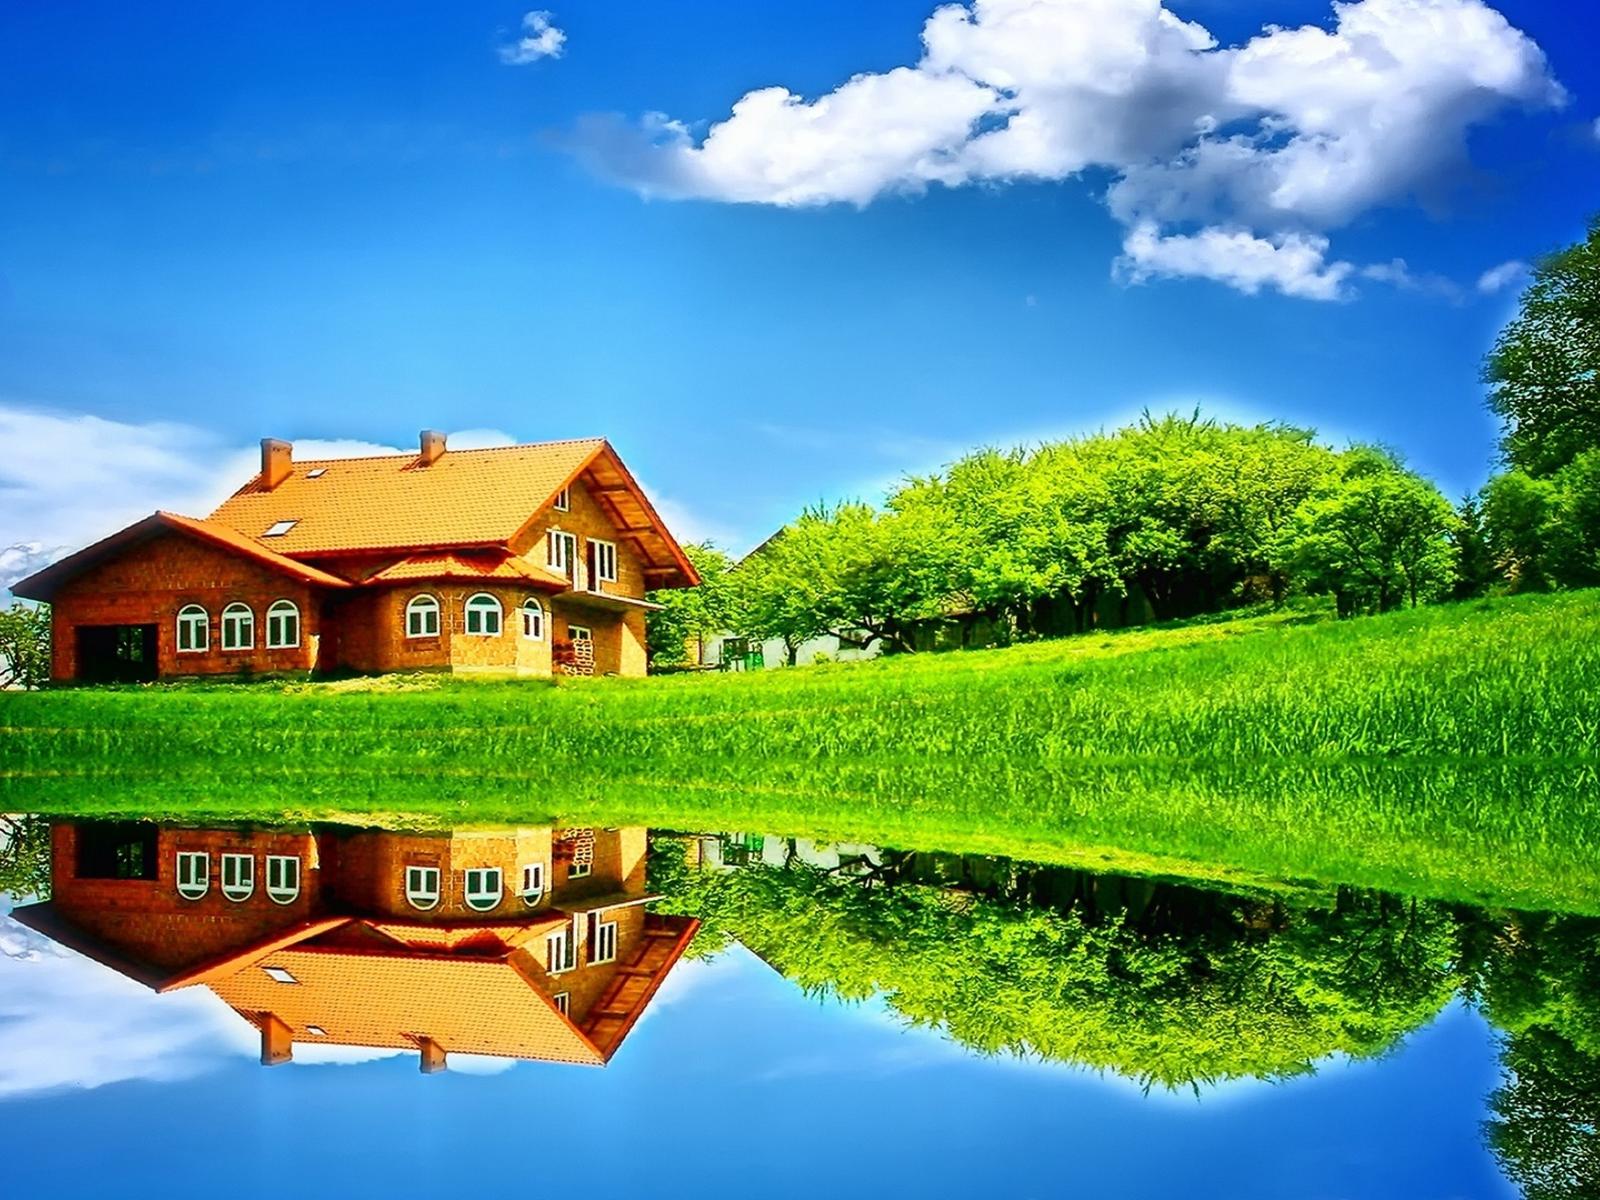 Wonderful house mirror in the lake summer day